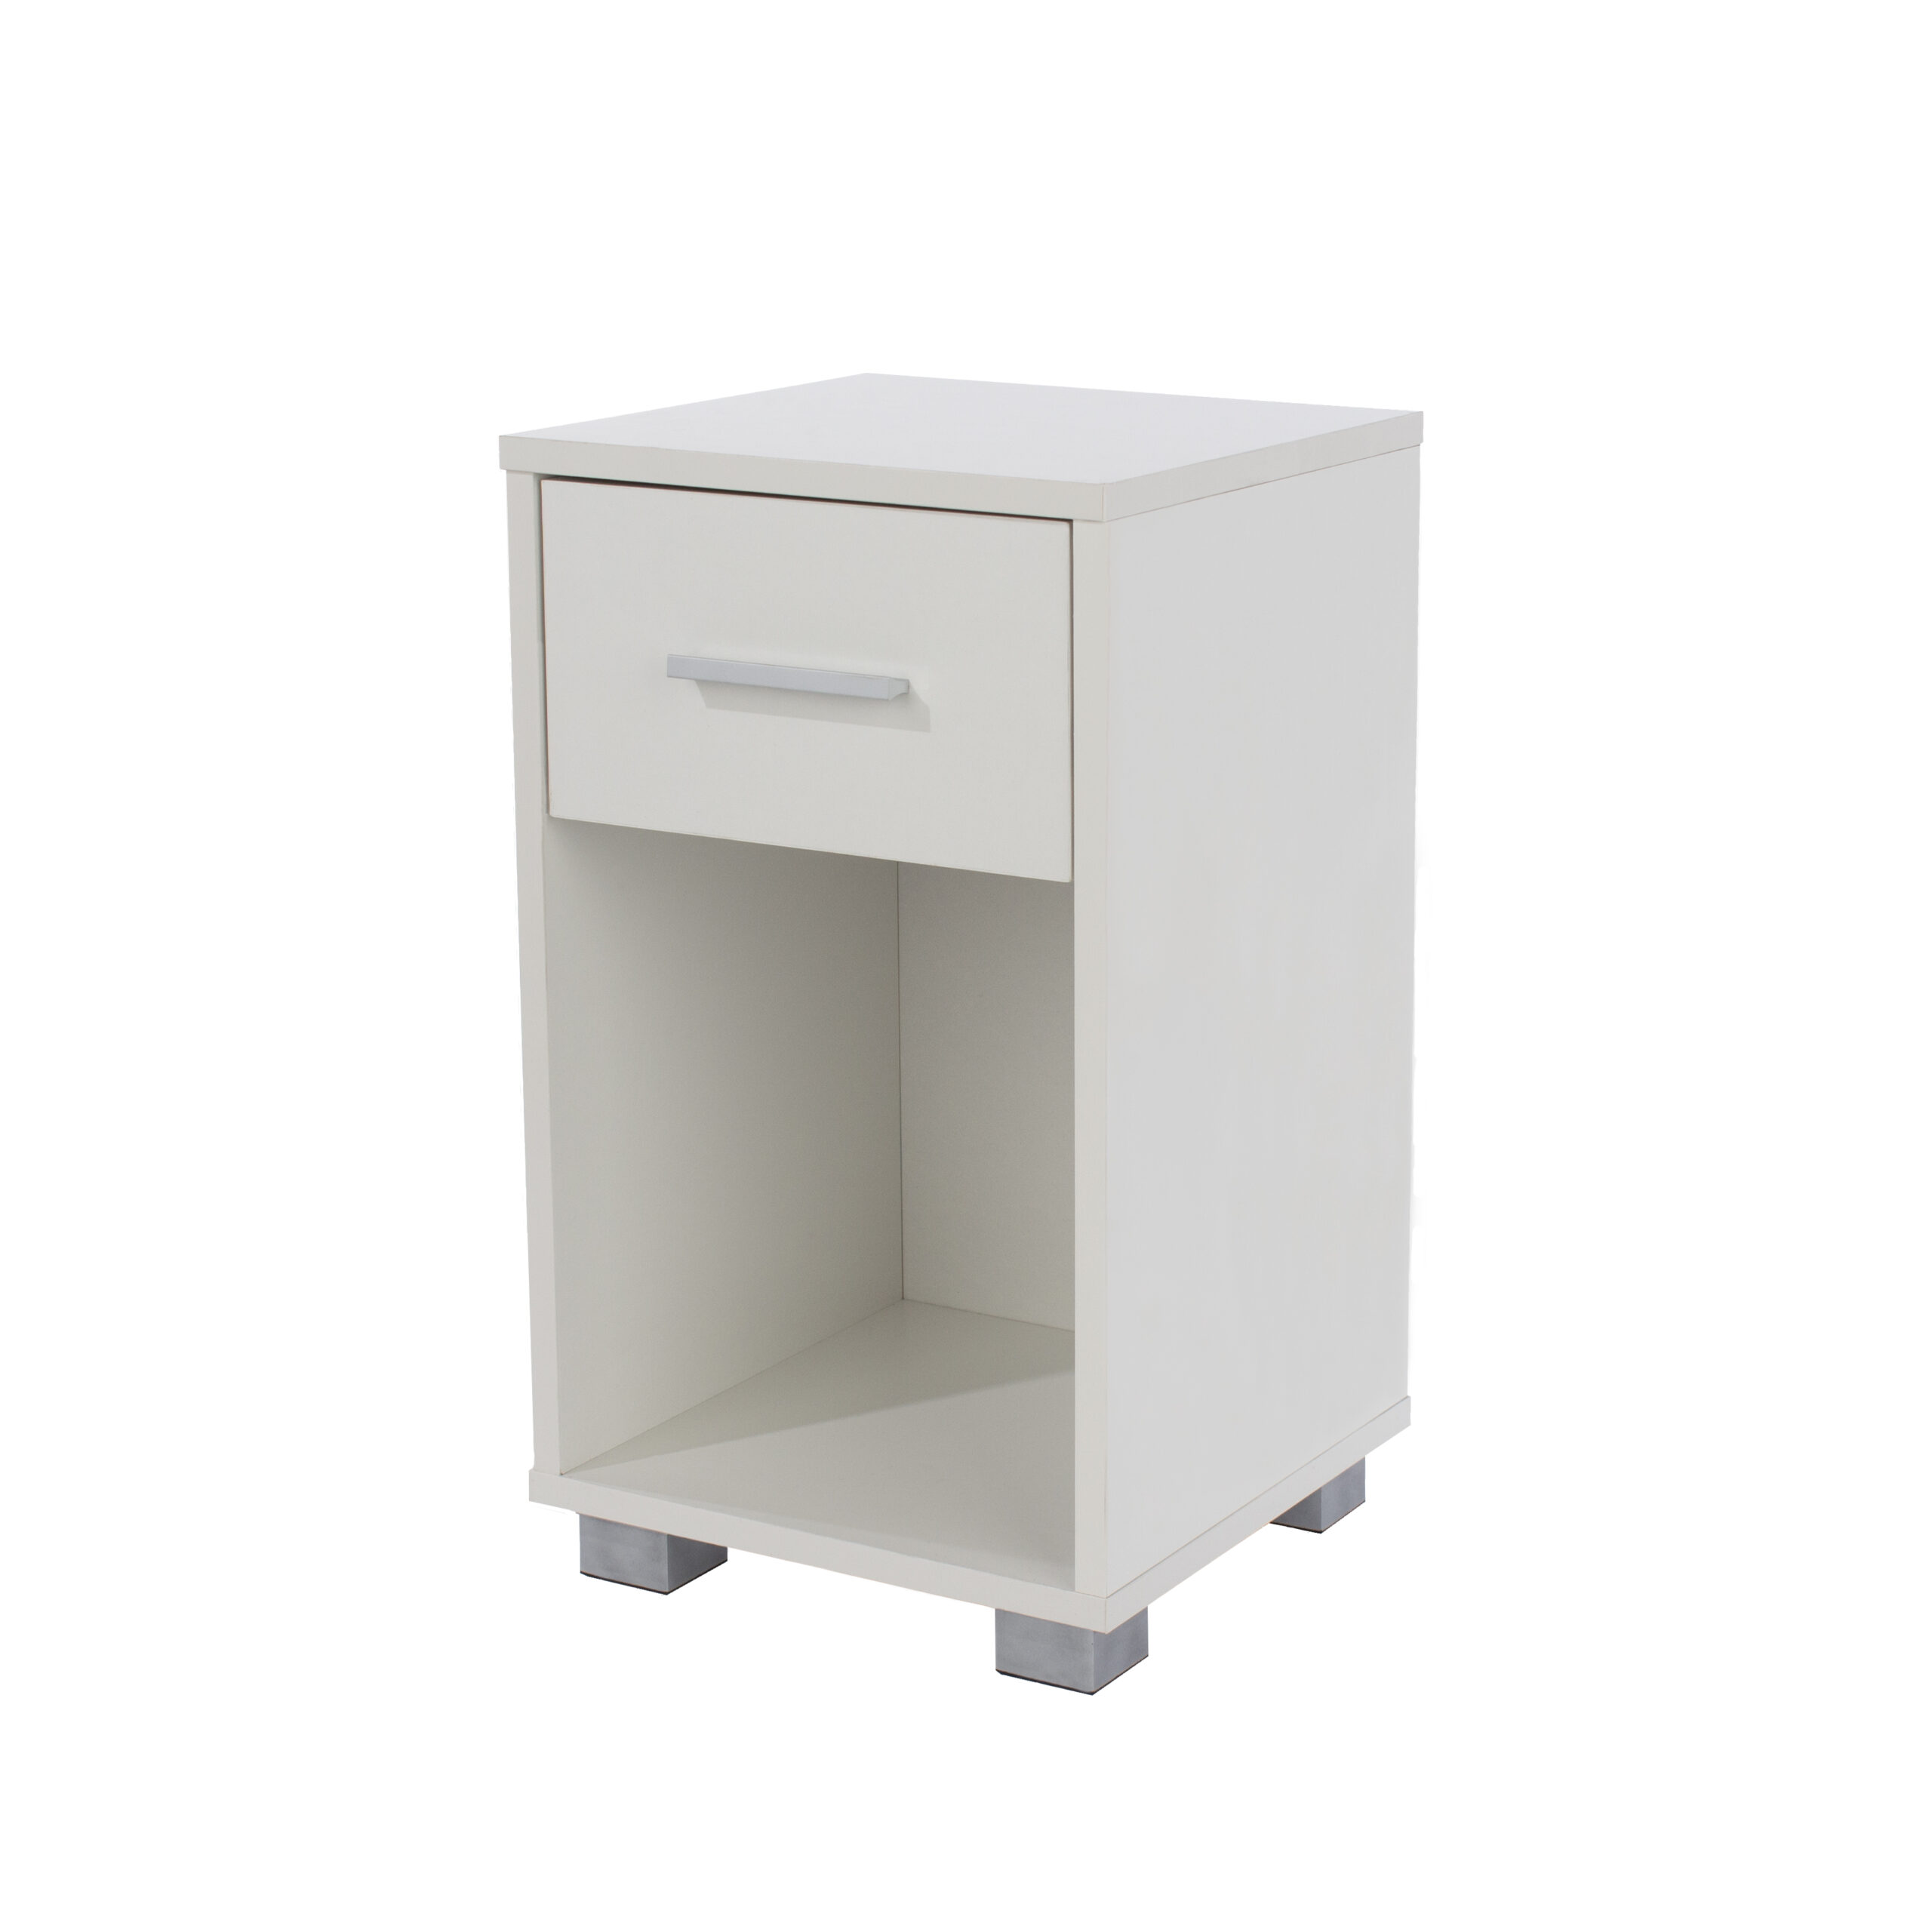 Losoy White 1 Drawer Compact Bedside Cabinet